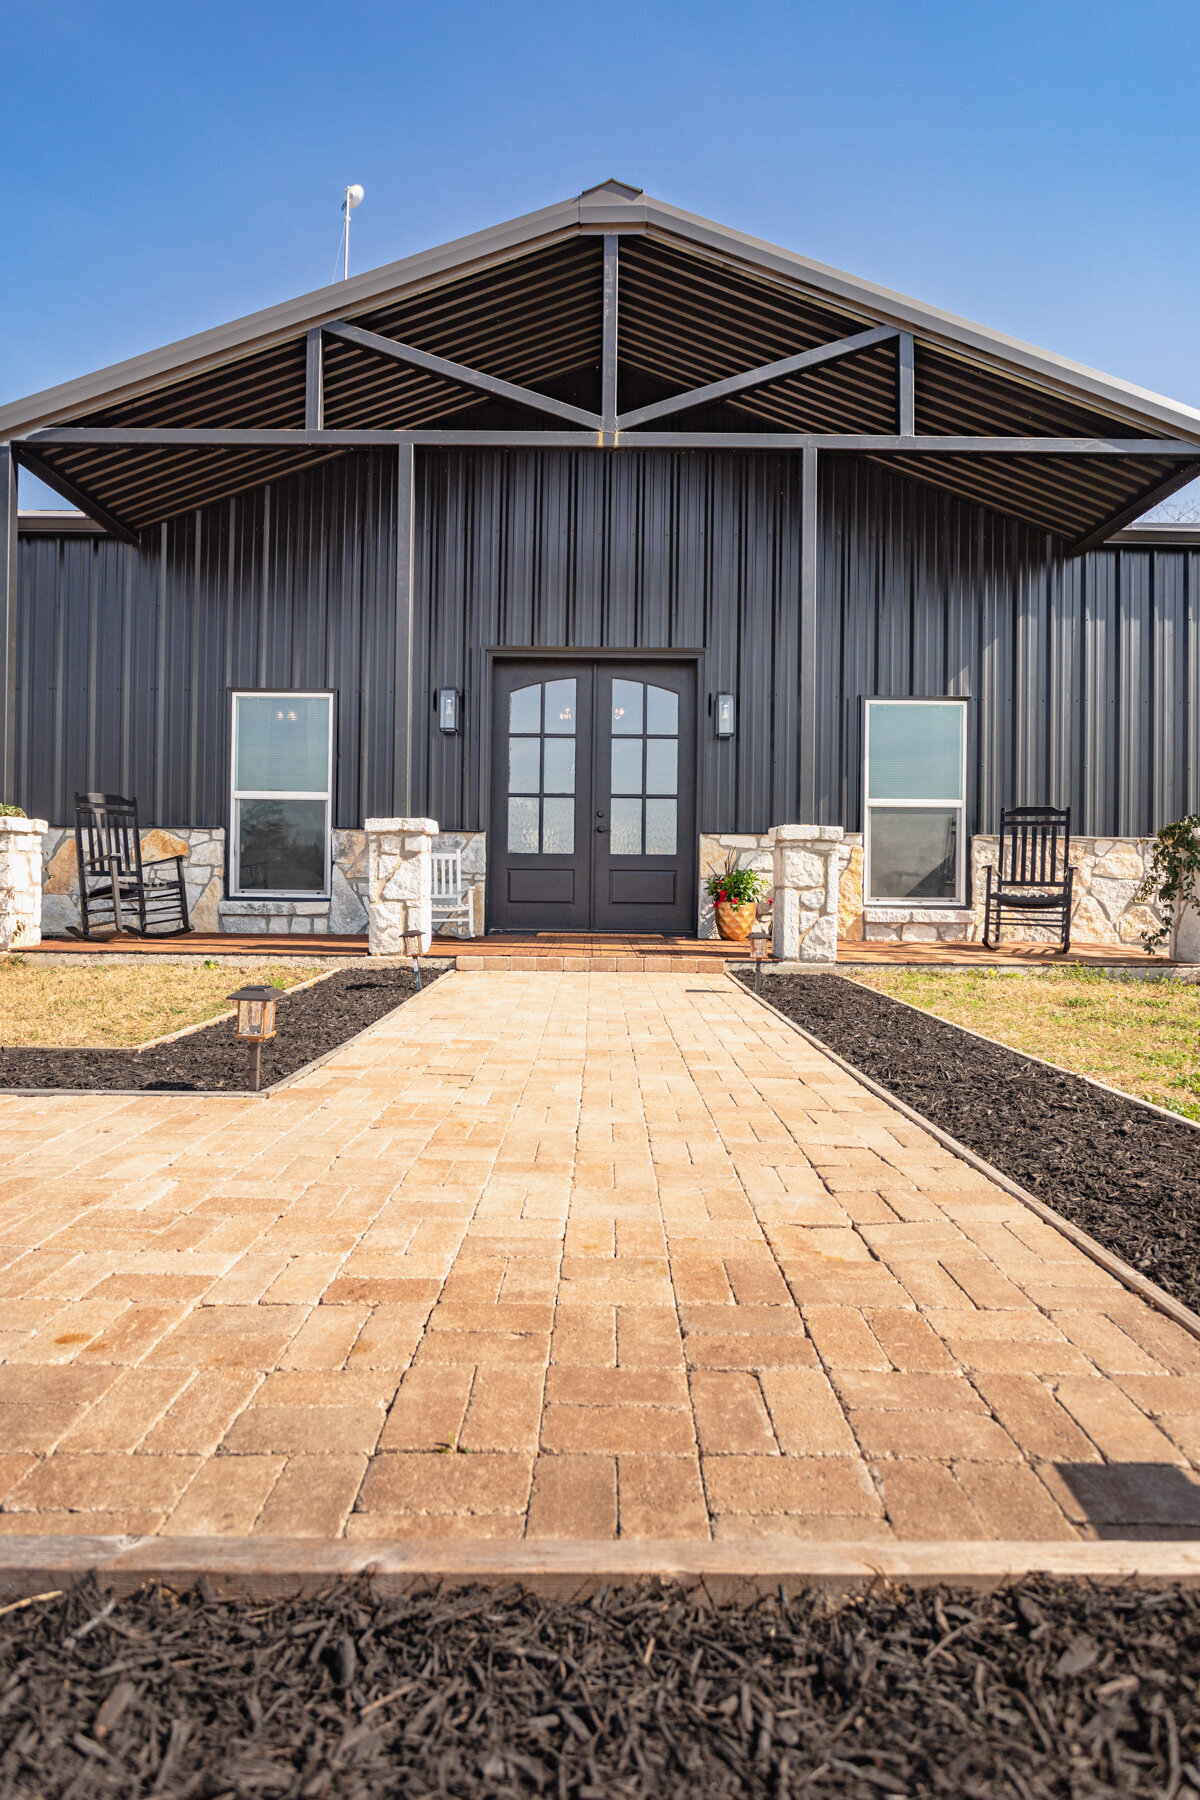 Front view of the main entrance of this five-bedroom, 3-bathroom vacation rental house for up to 10 guests with free wifi, private parking, outdoor games and seating, and bbq grill on 2 acres of land near Waco, TX.